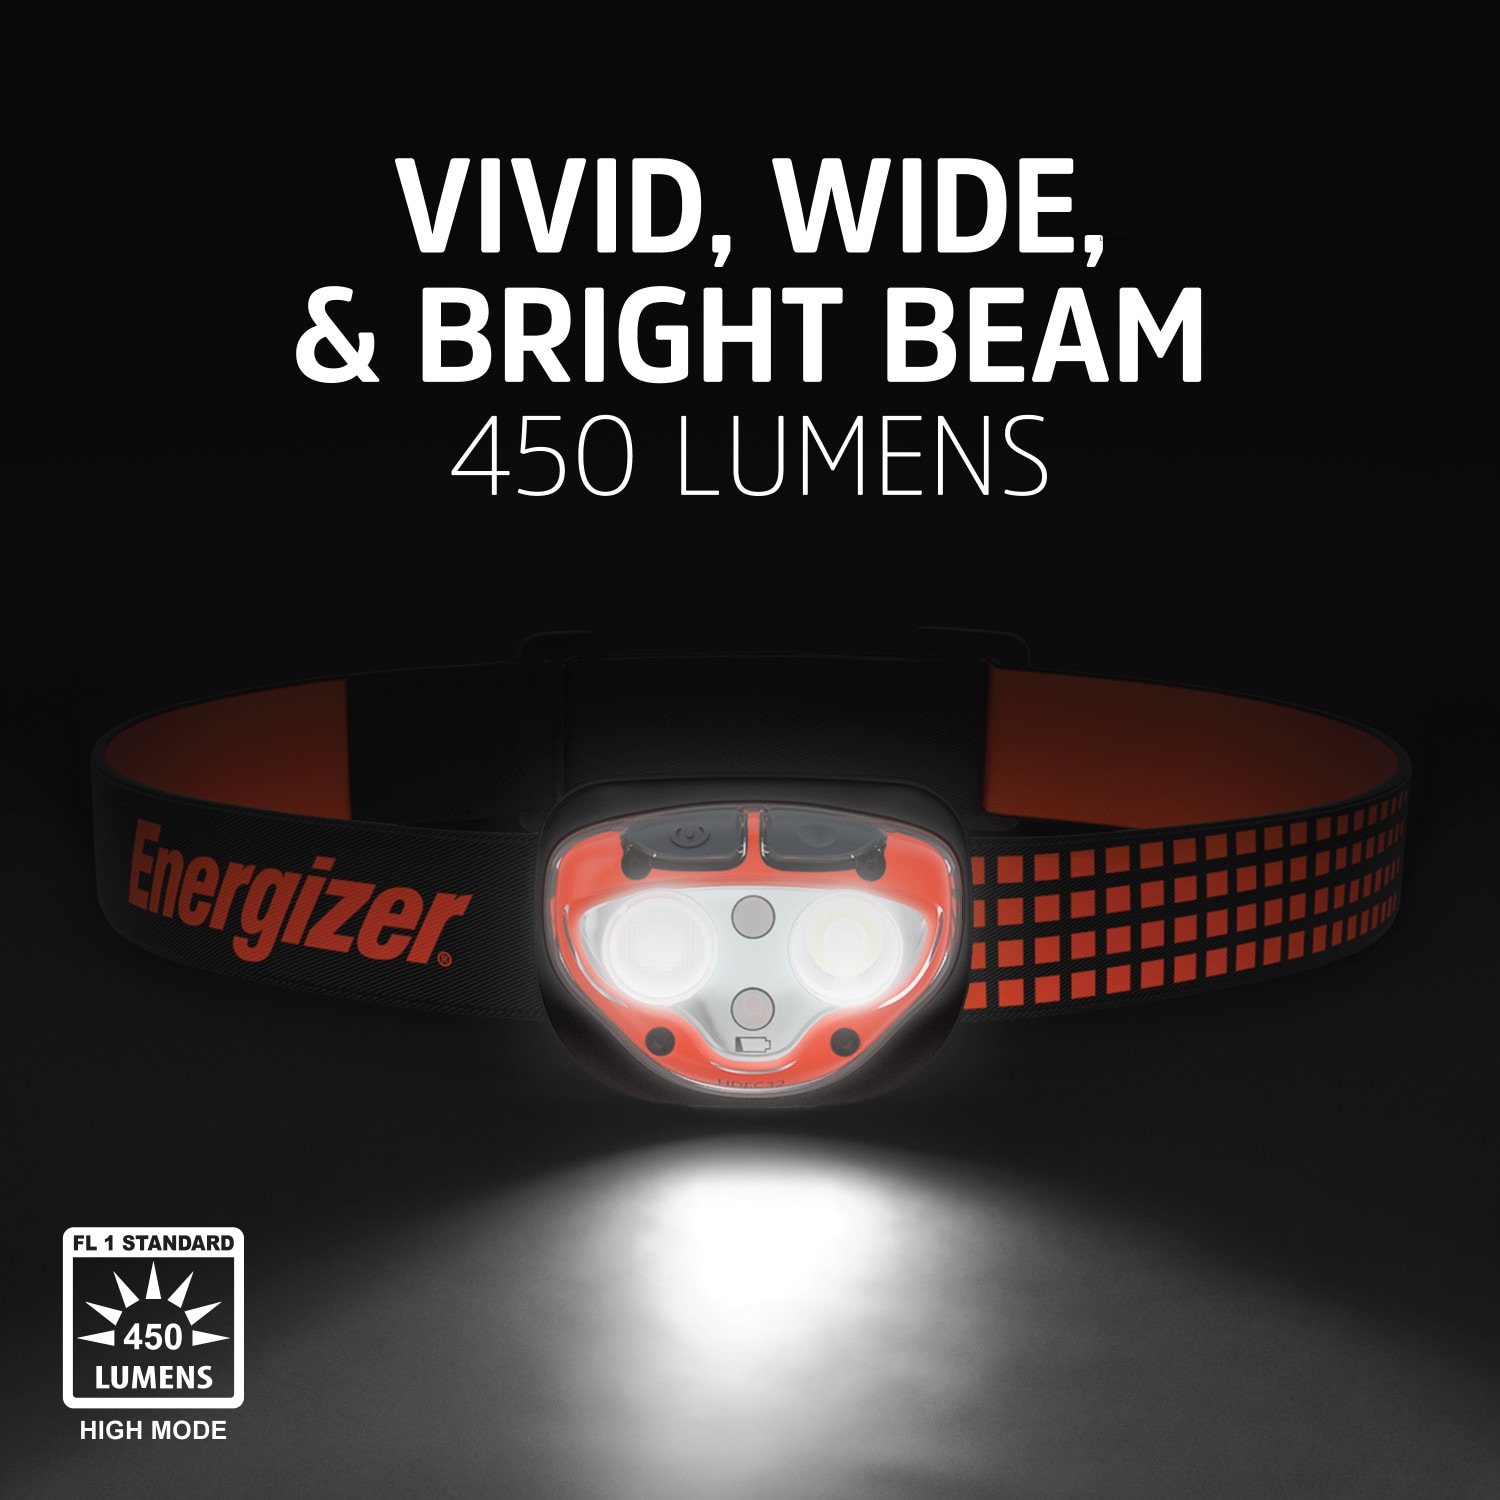 Included) LED (Battery at Energizer in Headlamps the Vision Headlamp 450-Lumen department